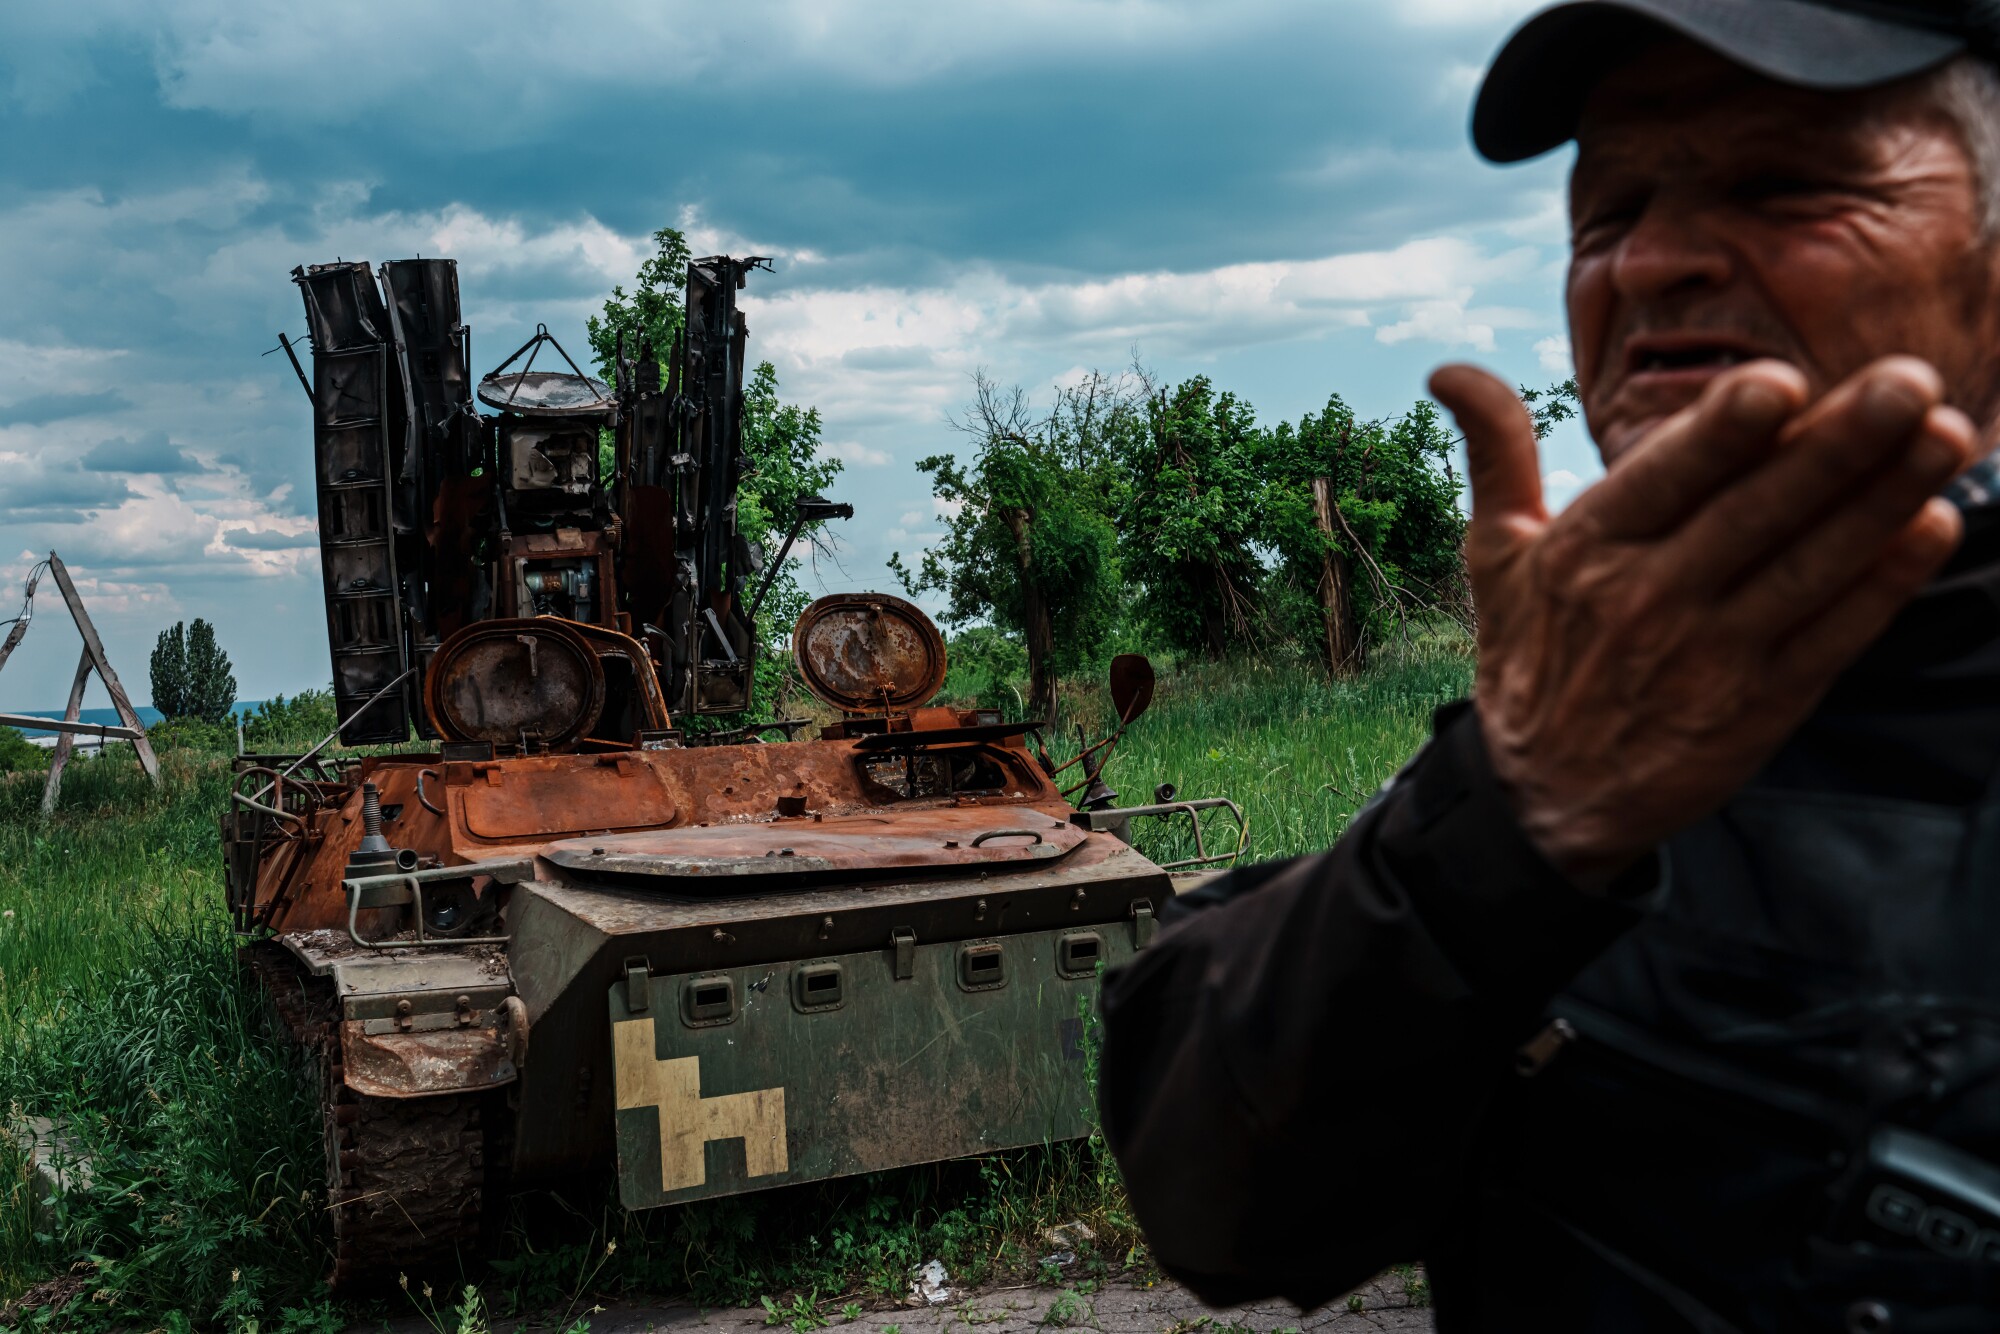 A man points to the huge wreckage of a military vehicle in a meadow